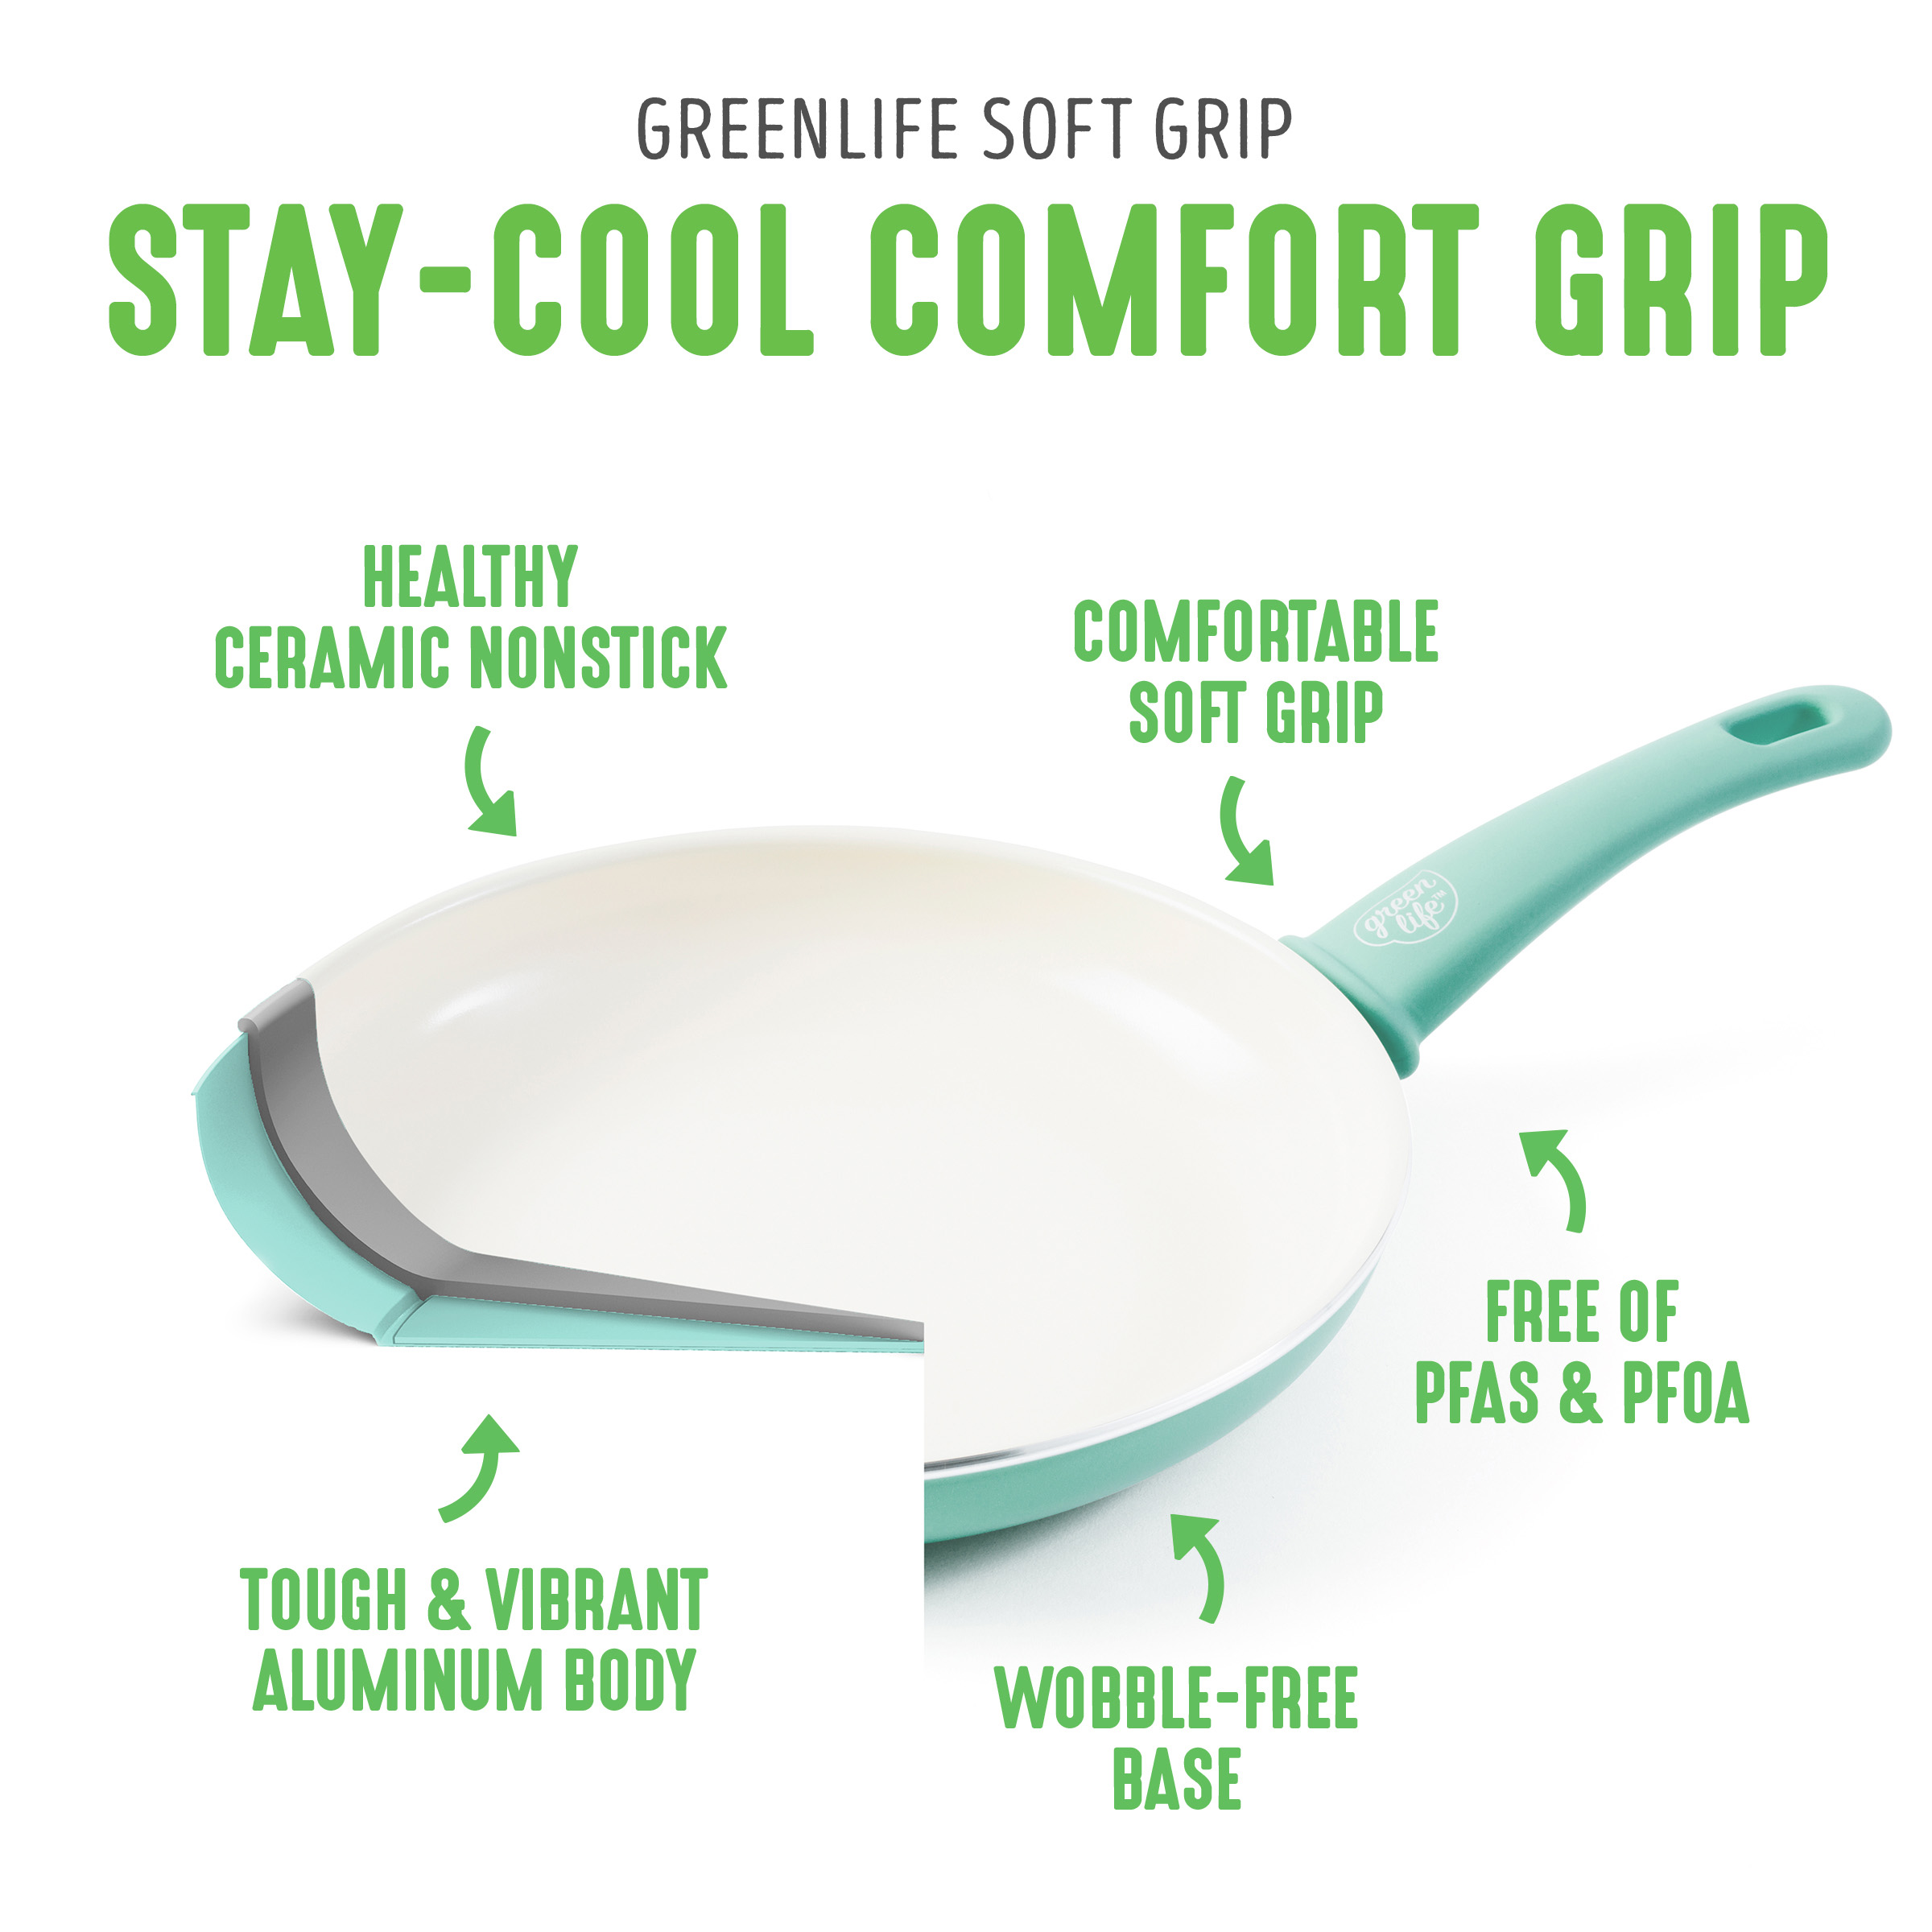 GreenLife 18-Piece Soft Grip Toxin-Free Healthy Ceramic Non-Stick Cookware Set, Turquoise, Dishwasher Safe - image 5 of 12